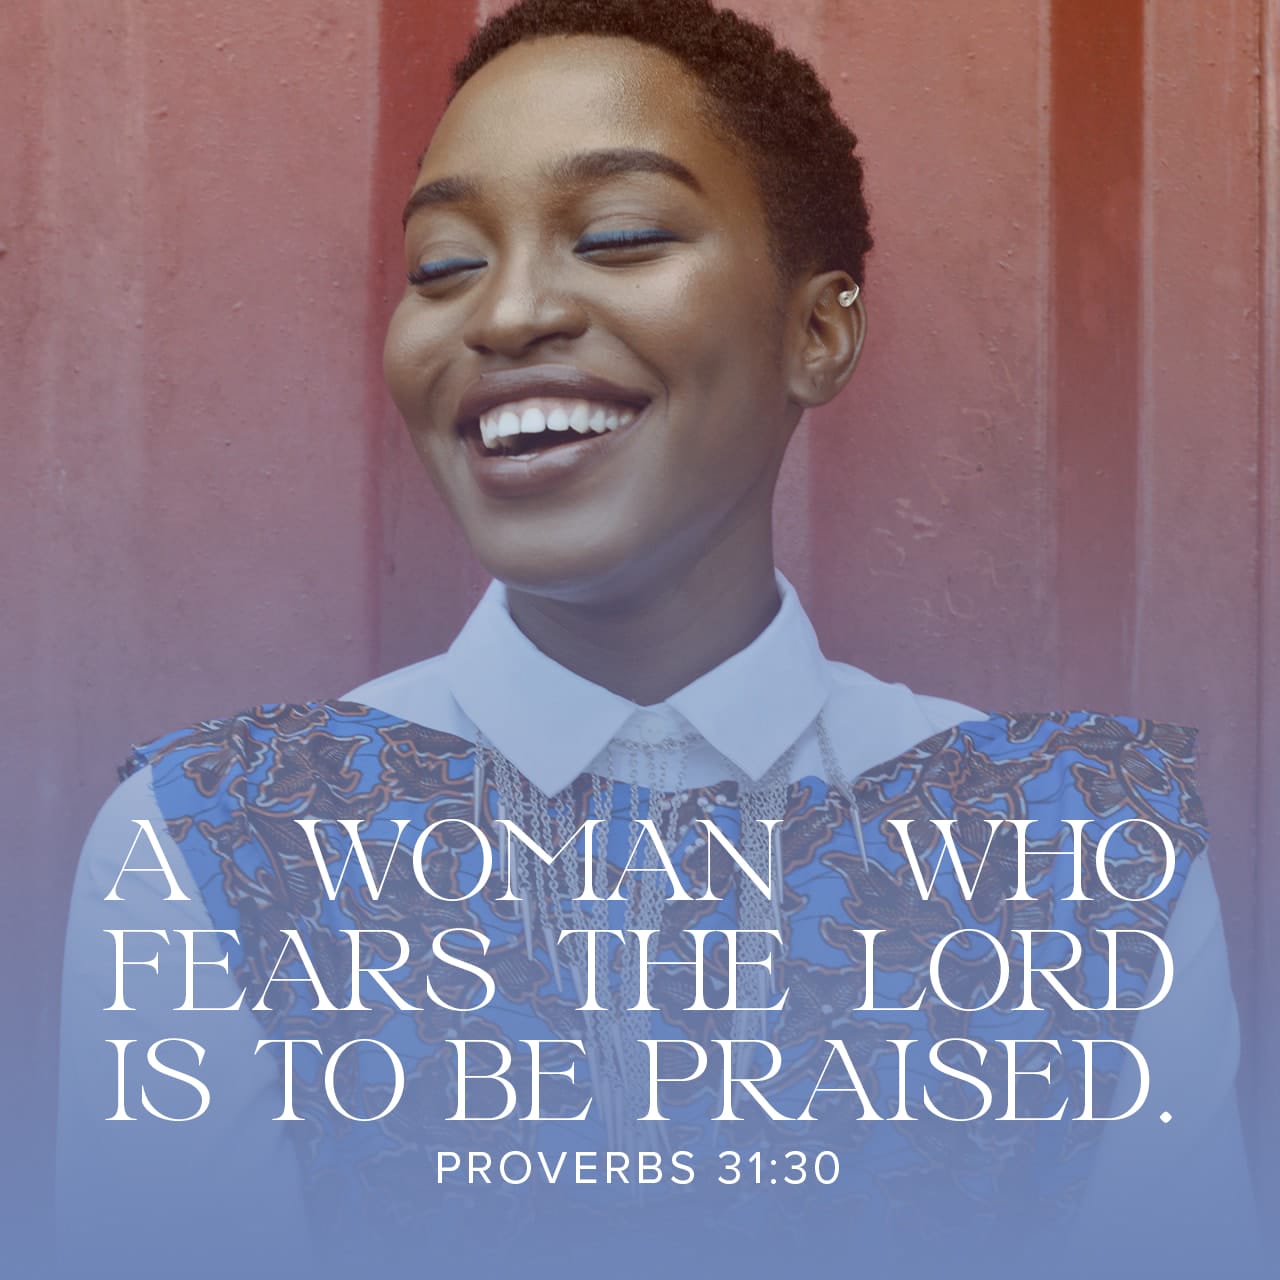 A woman who fears the Lord is to be praised. - Provers 31:30 - Verse Image